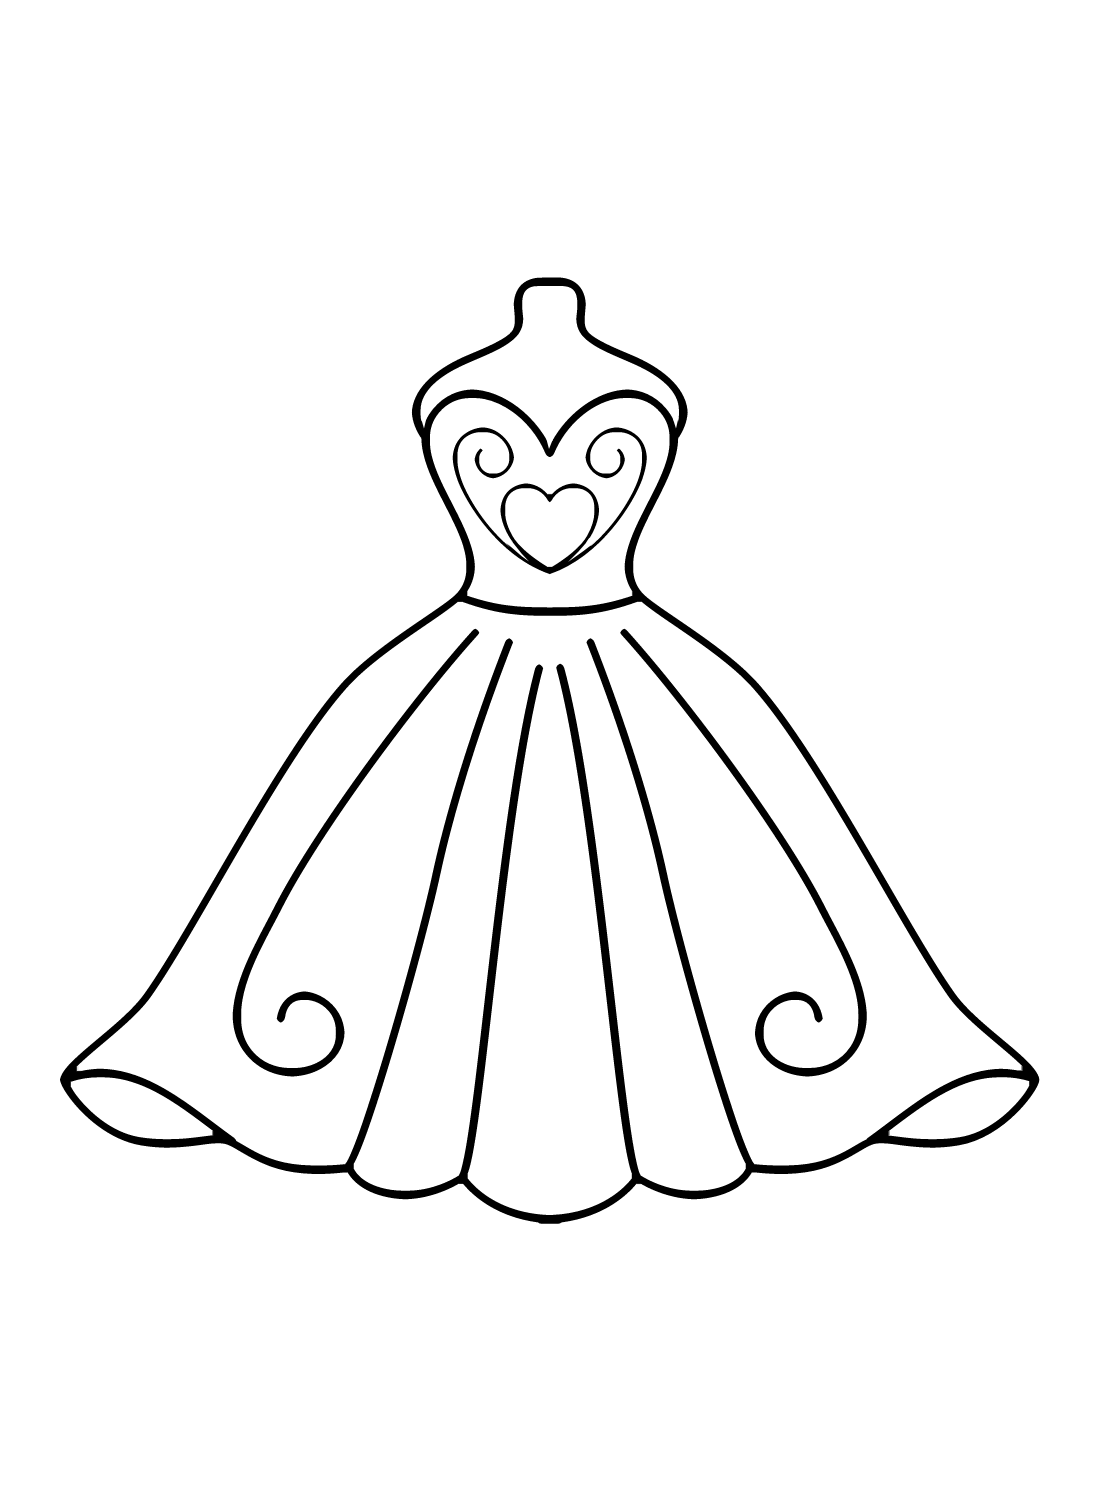 Short Wedding Dresses Coloring Page - Free Printable Coloring Pages